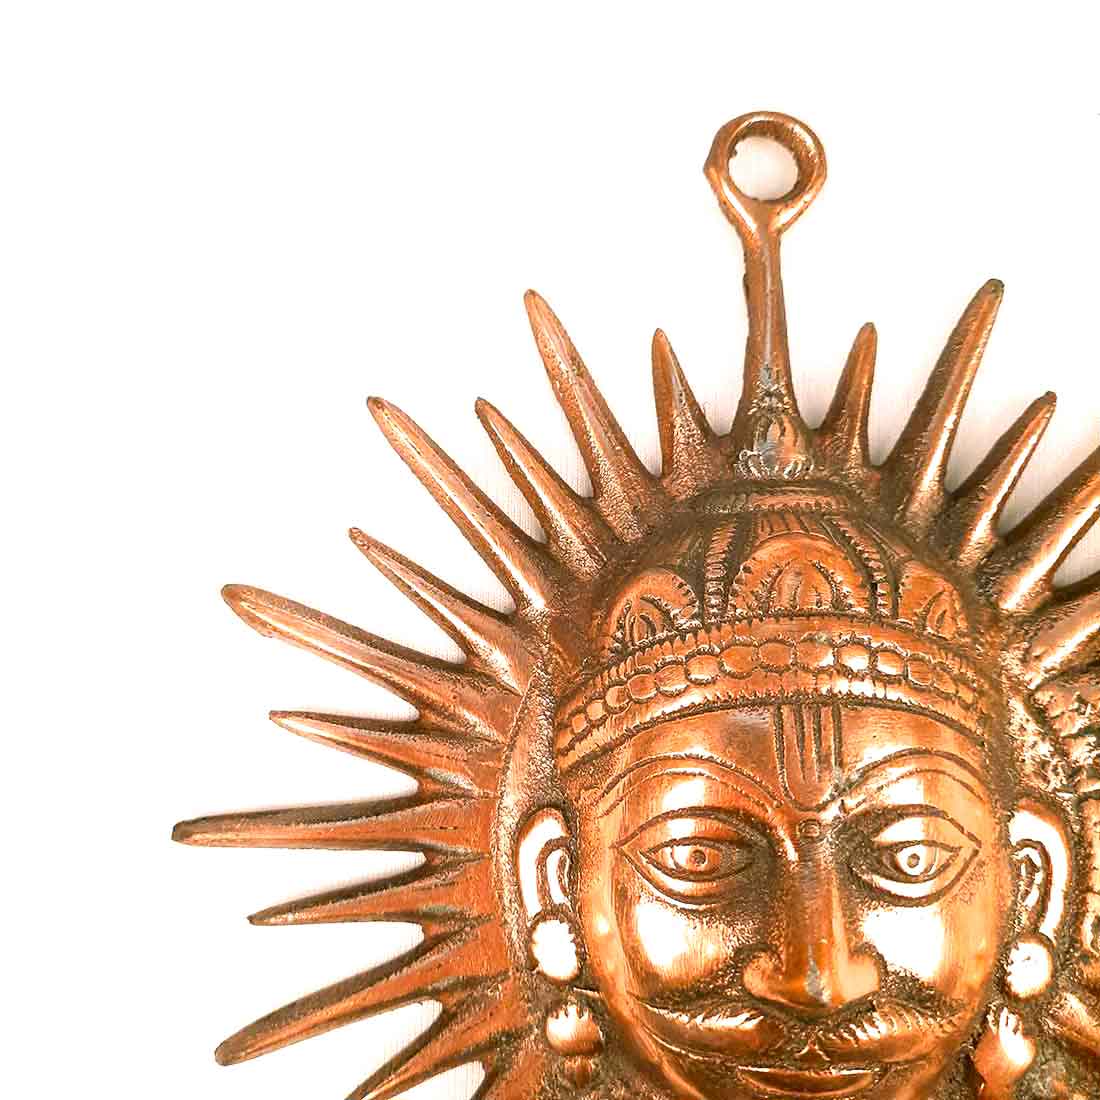 Sun Wall Hanging - Metal Wall Decor - For Living Room Interior Decoration - 6 Inch - ApkaMart #Size_8 Inch